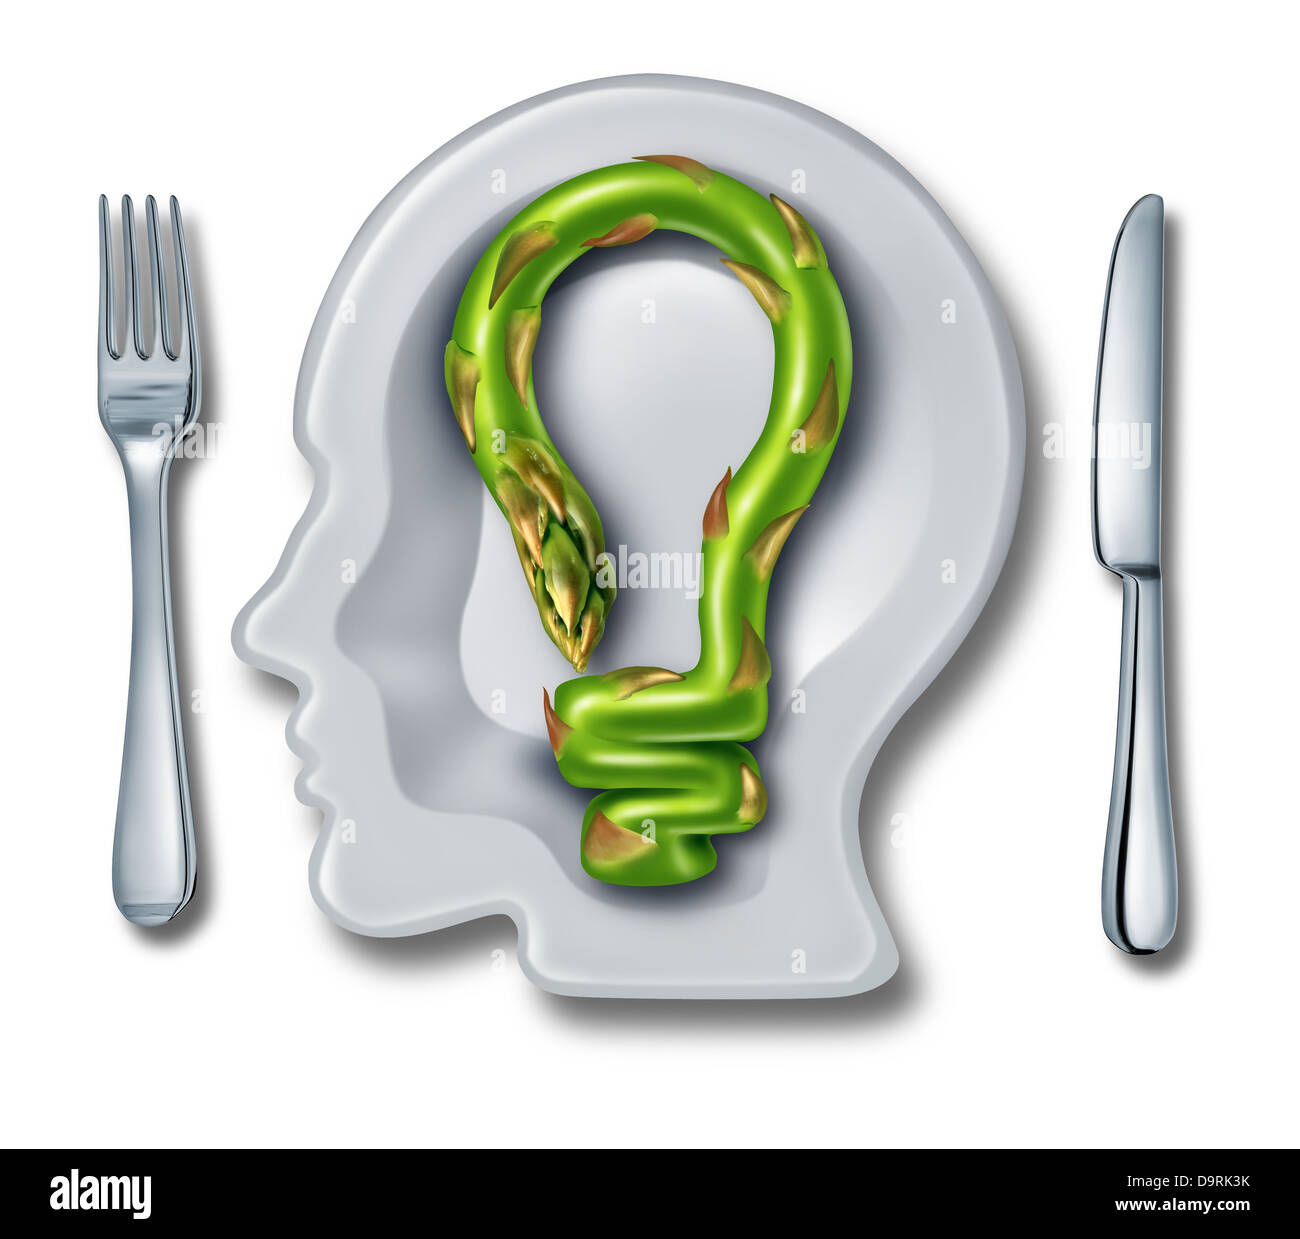 Cooking ideas with a white ceramic plate in the shape of a human head and an asparagus vegetable shaped as a light bulb as a foo Stock Photo